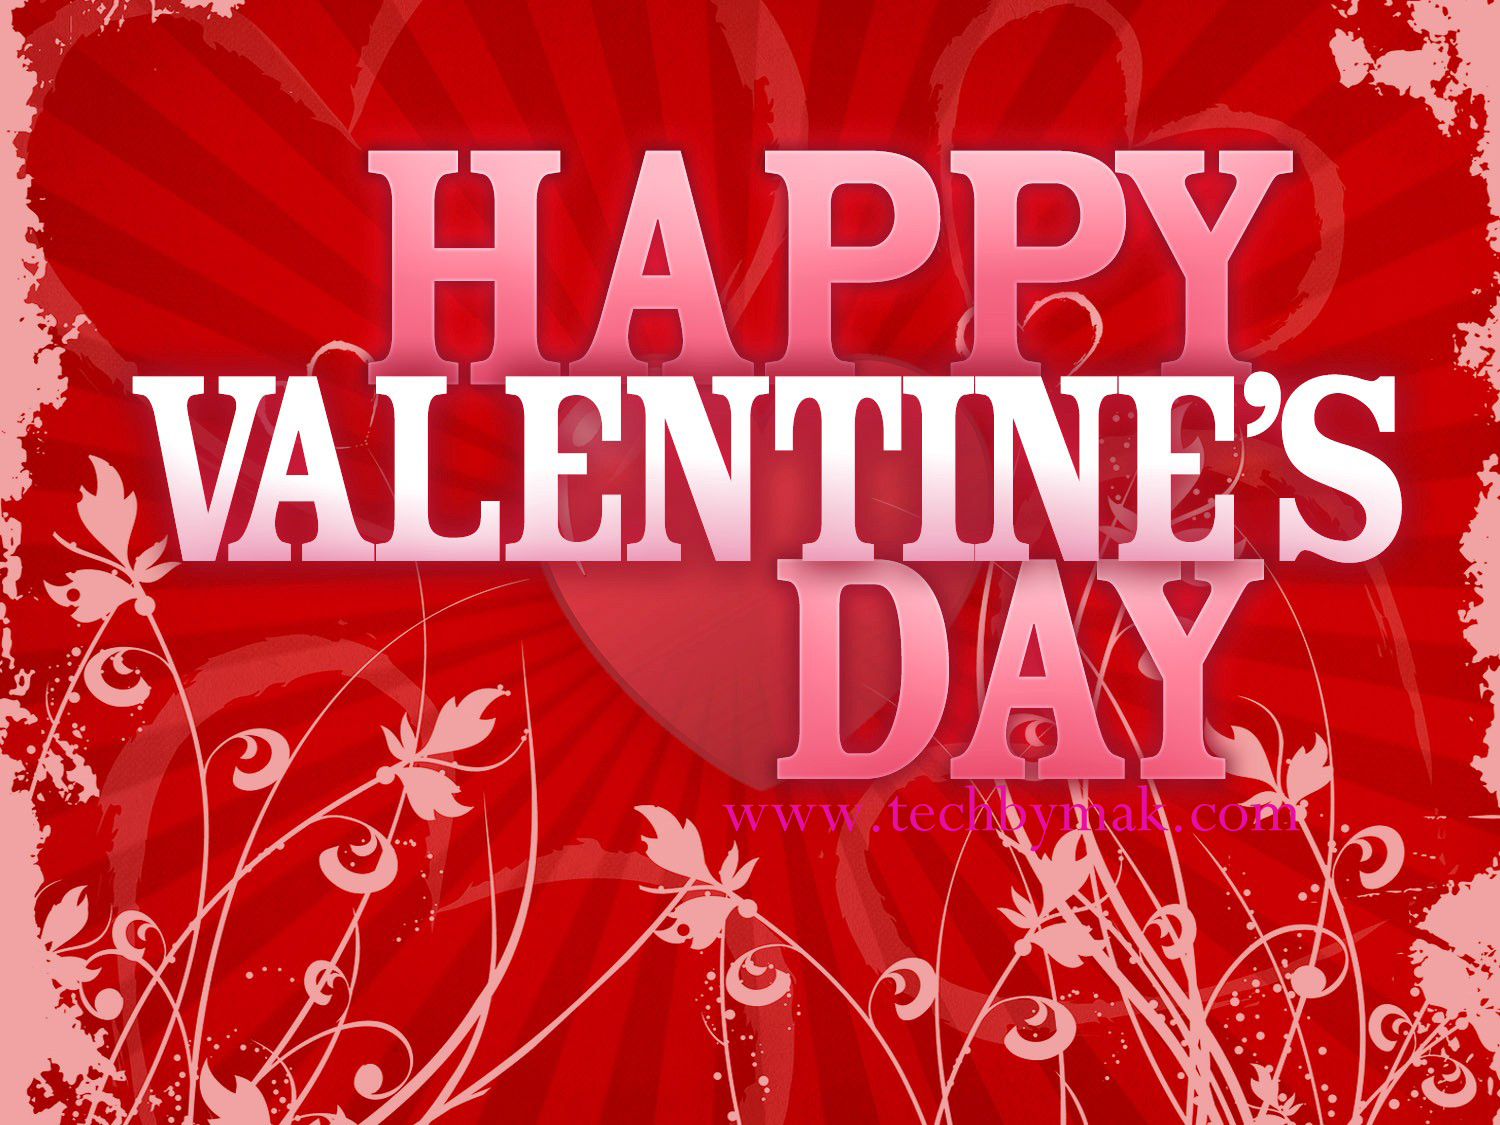 Happy Valentines day Pictures,photos and wallpapers 2016